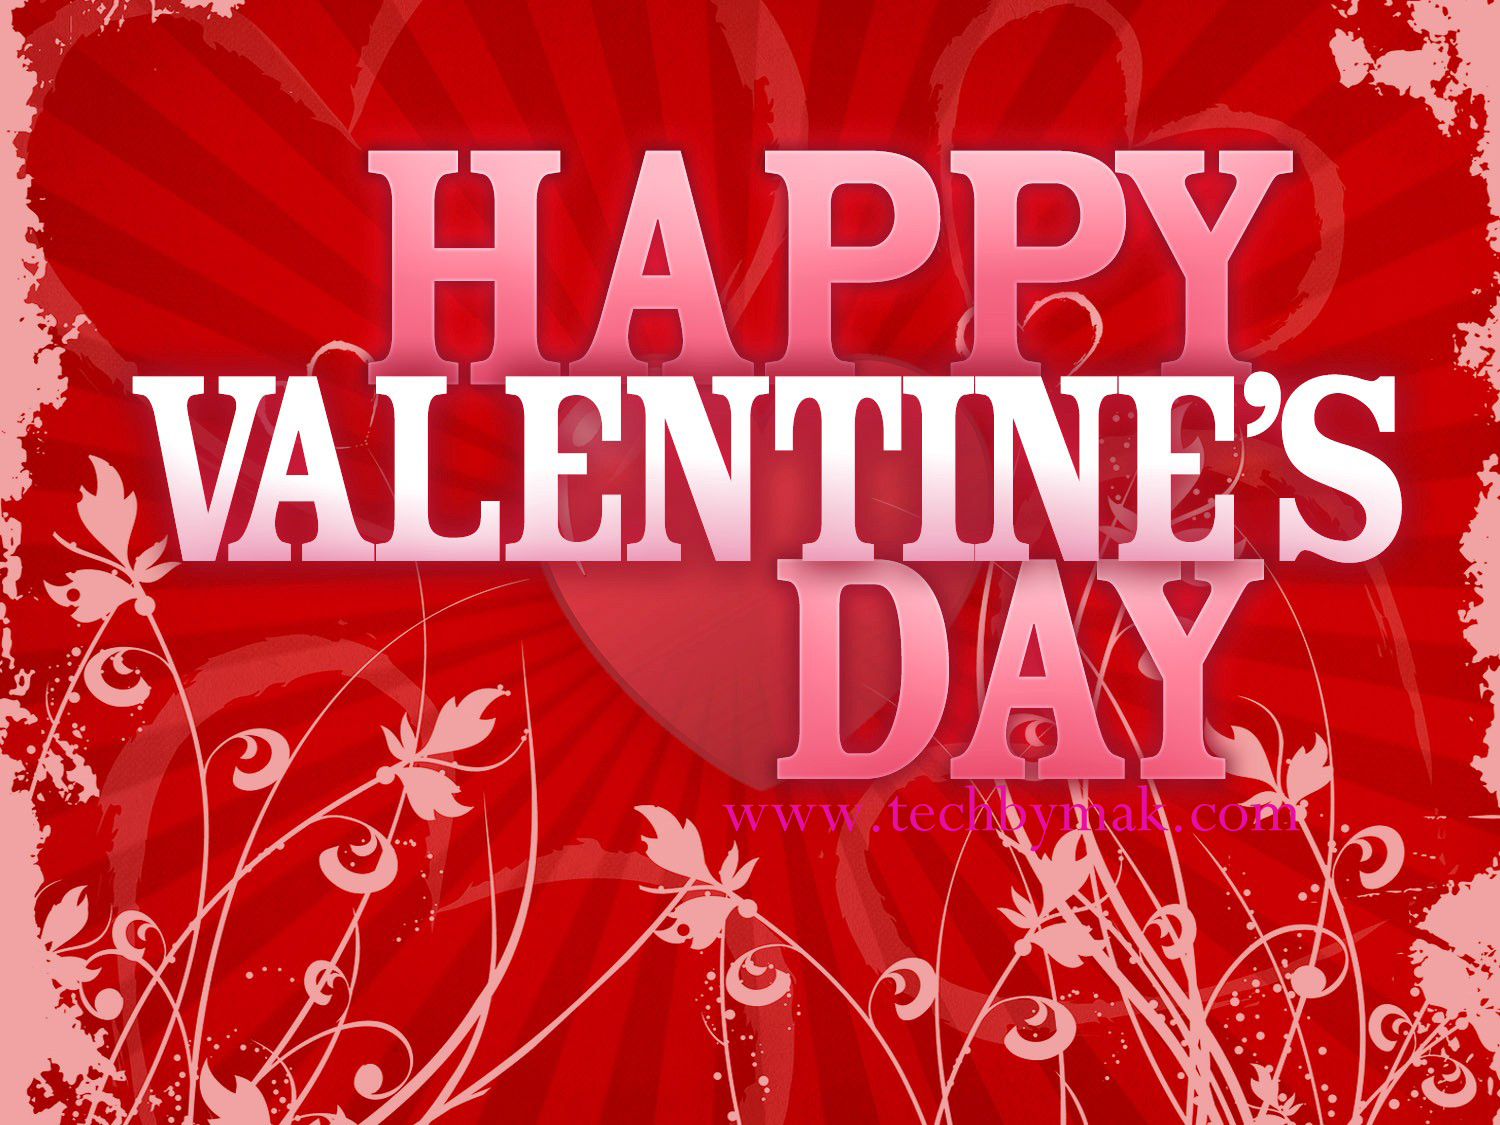 Happy Valentines day Pictures,photos and wallpapers 2016